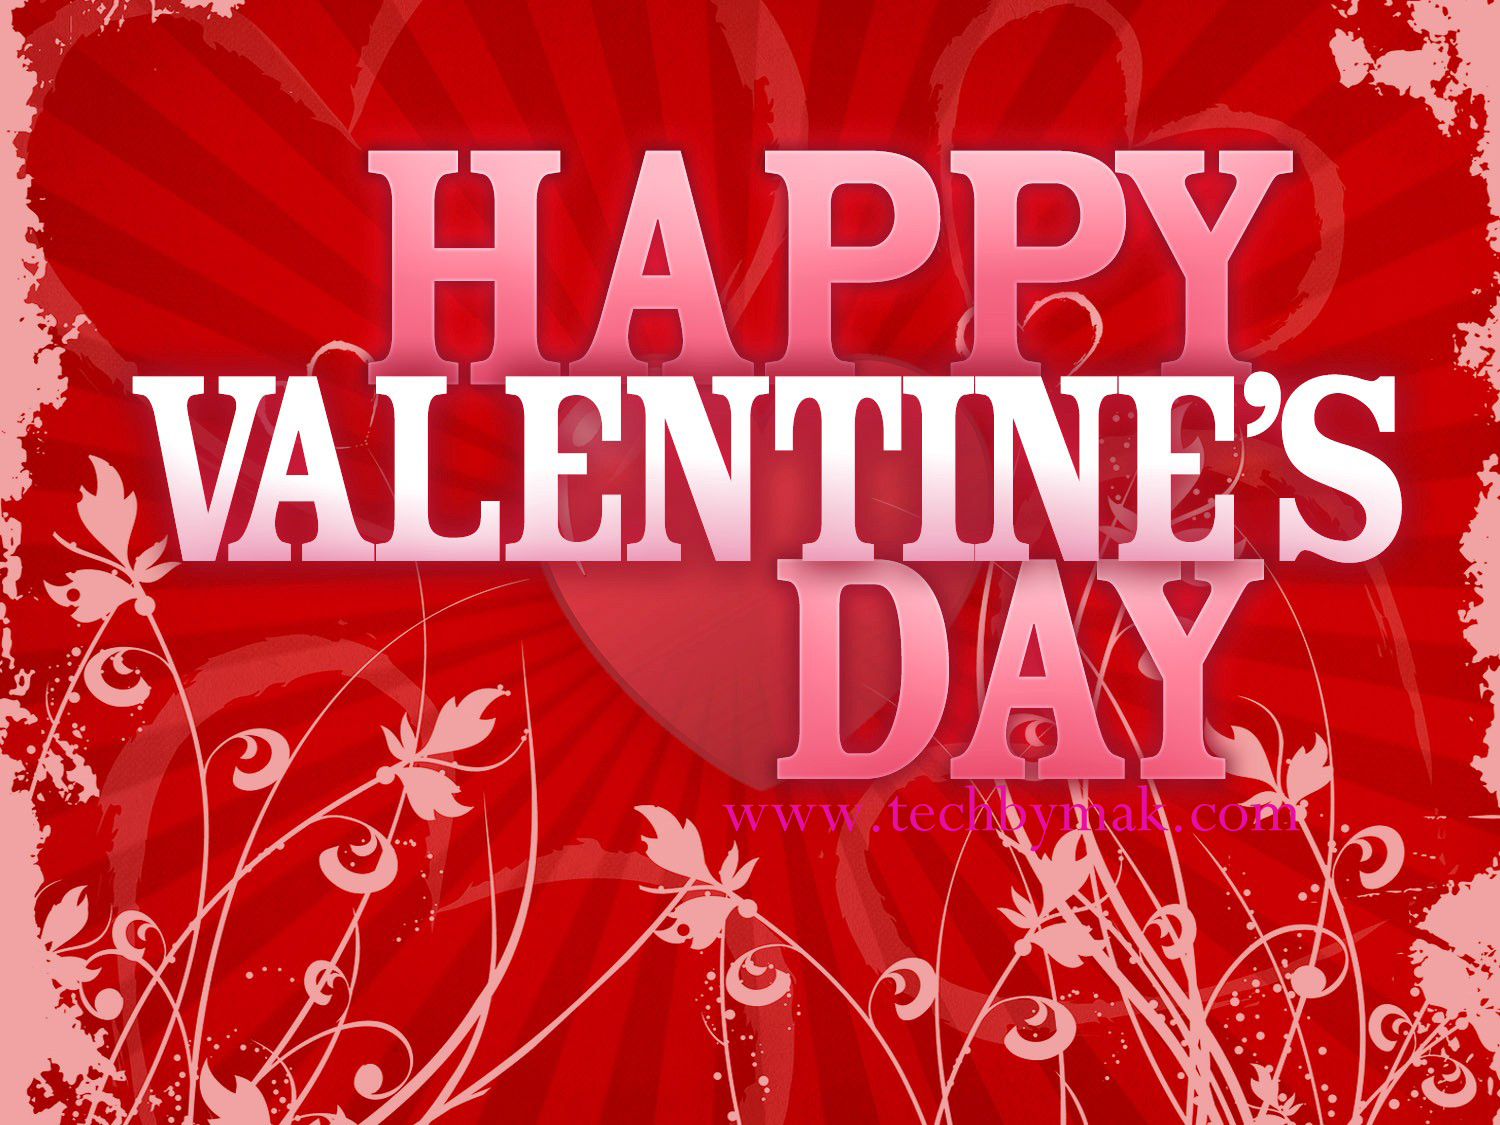 Happy Valentines day Pictures,photos and wallpapers 2016